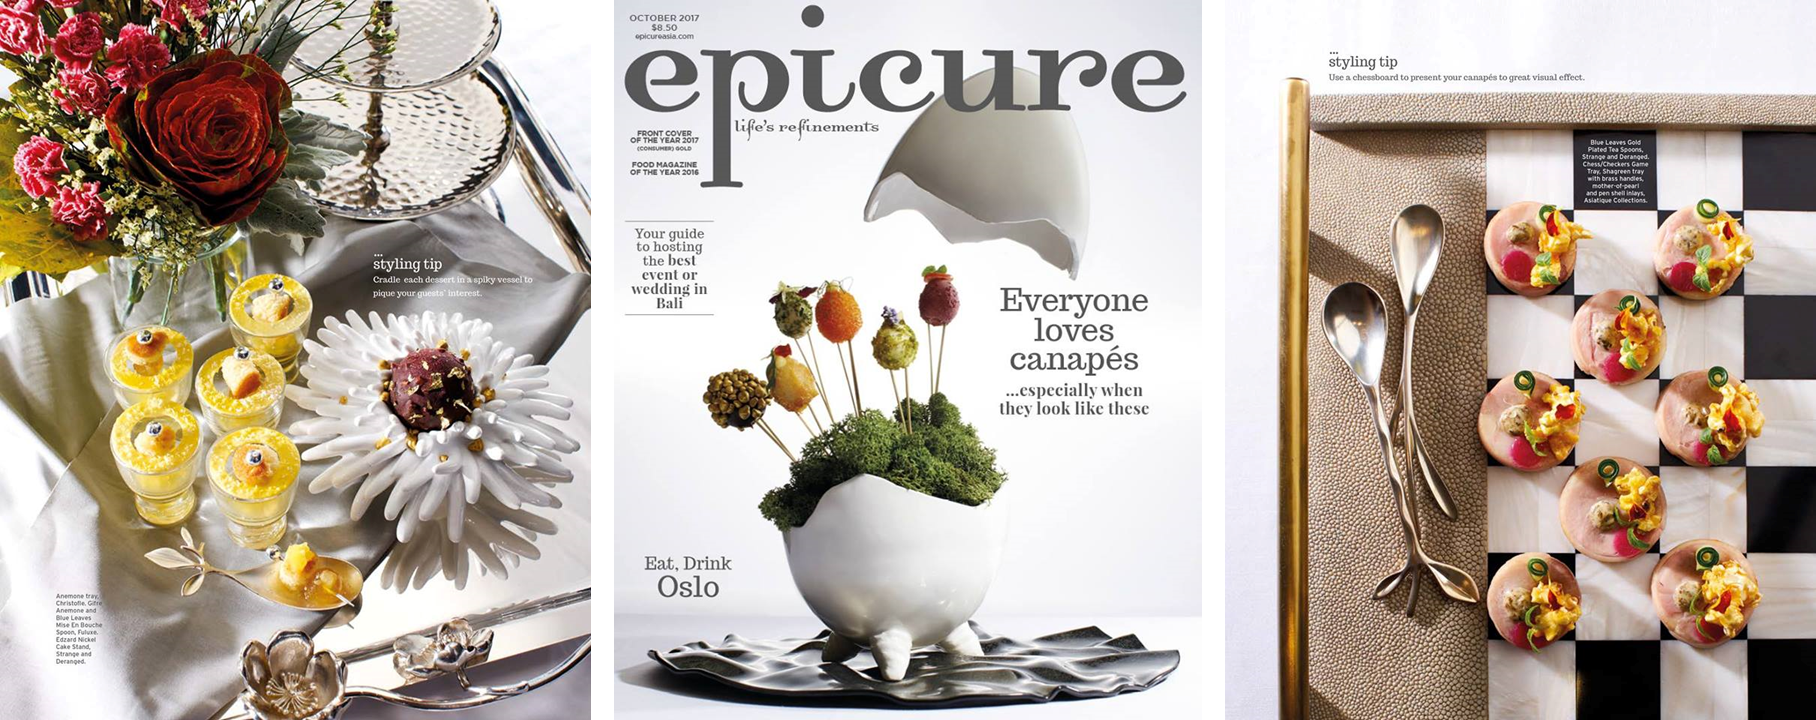 Fuluxe_Epicure_Lifes refinement_October 2017 Cover